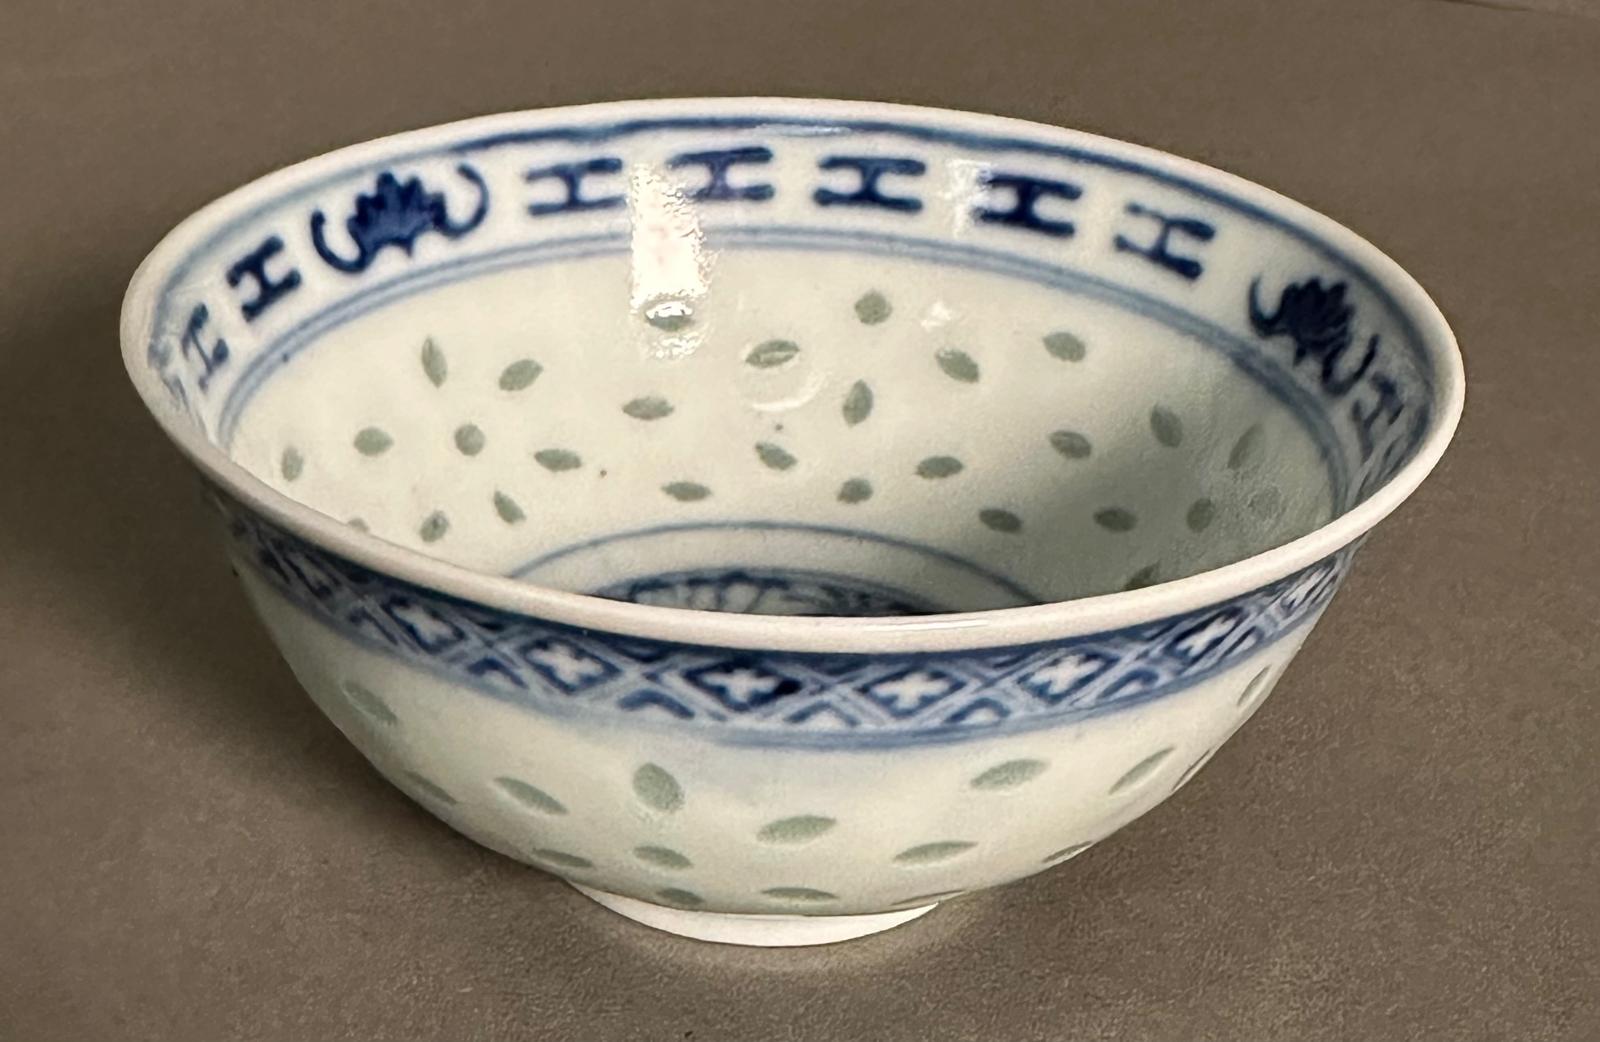 A selection of Chinese blue and white ceramic to include a plate, side plates and a small bowl - Image 5 of 12